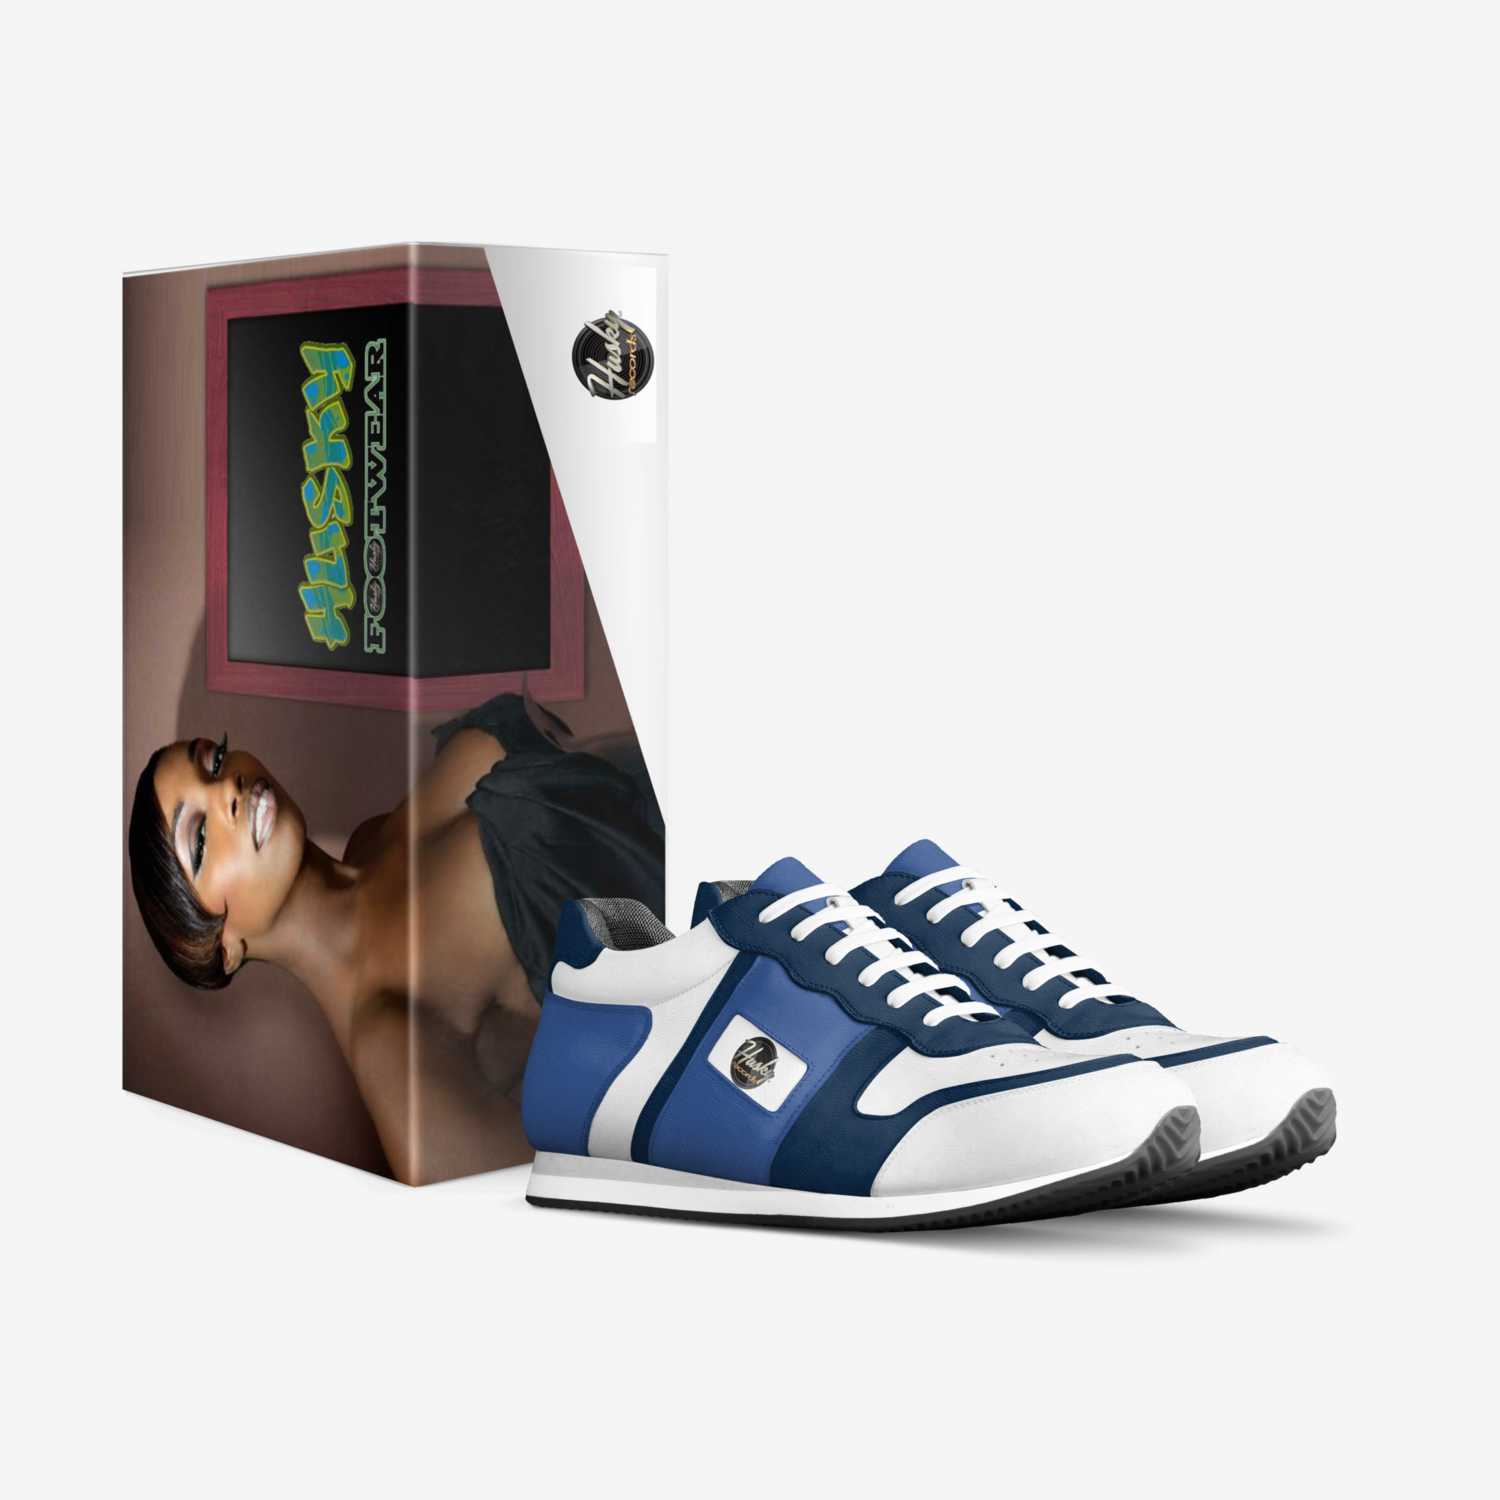 Husky Runnerz -Blu custom made in Italy shoes by Wallace Davis | Box view